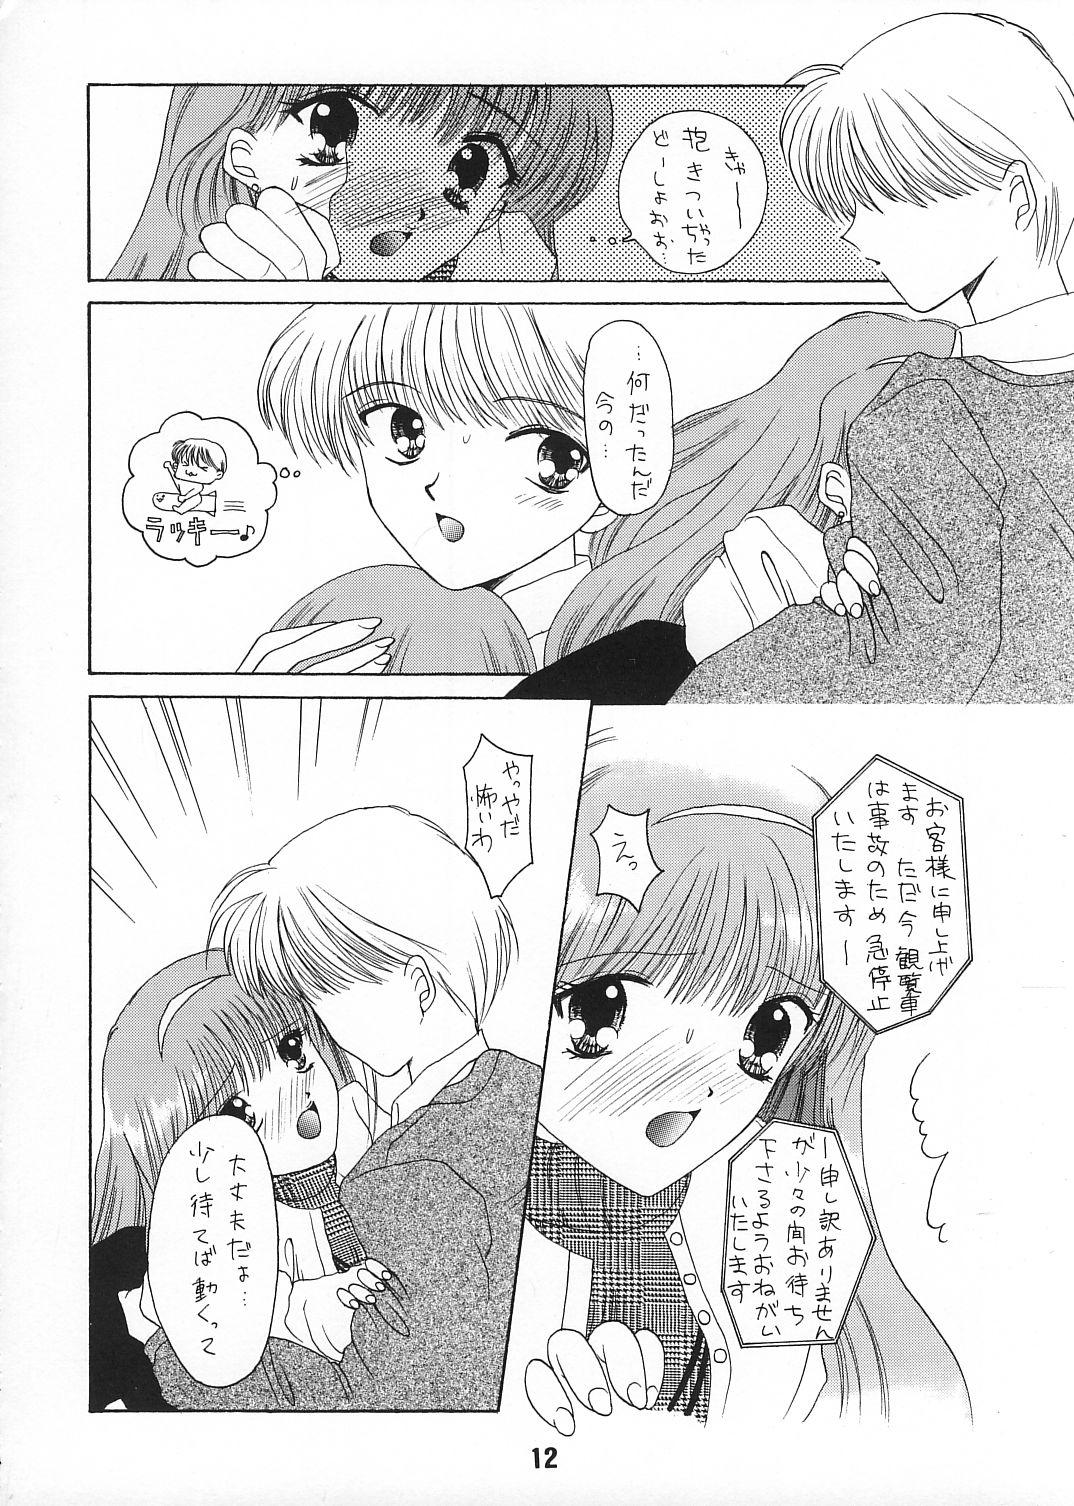 Missionary Mille-feuille - Tokimeki memorial Sex - Page 11